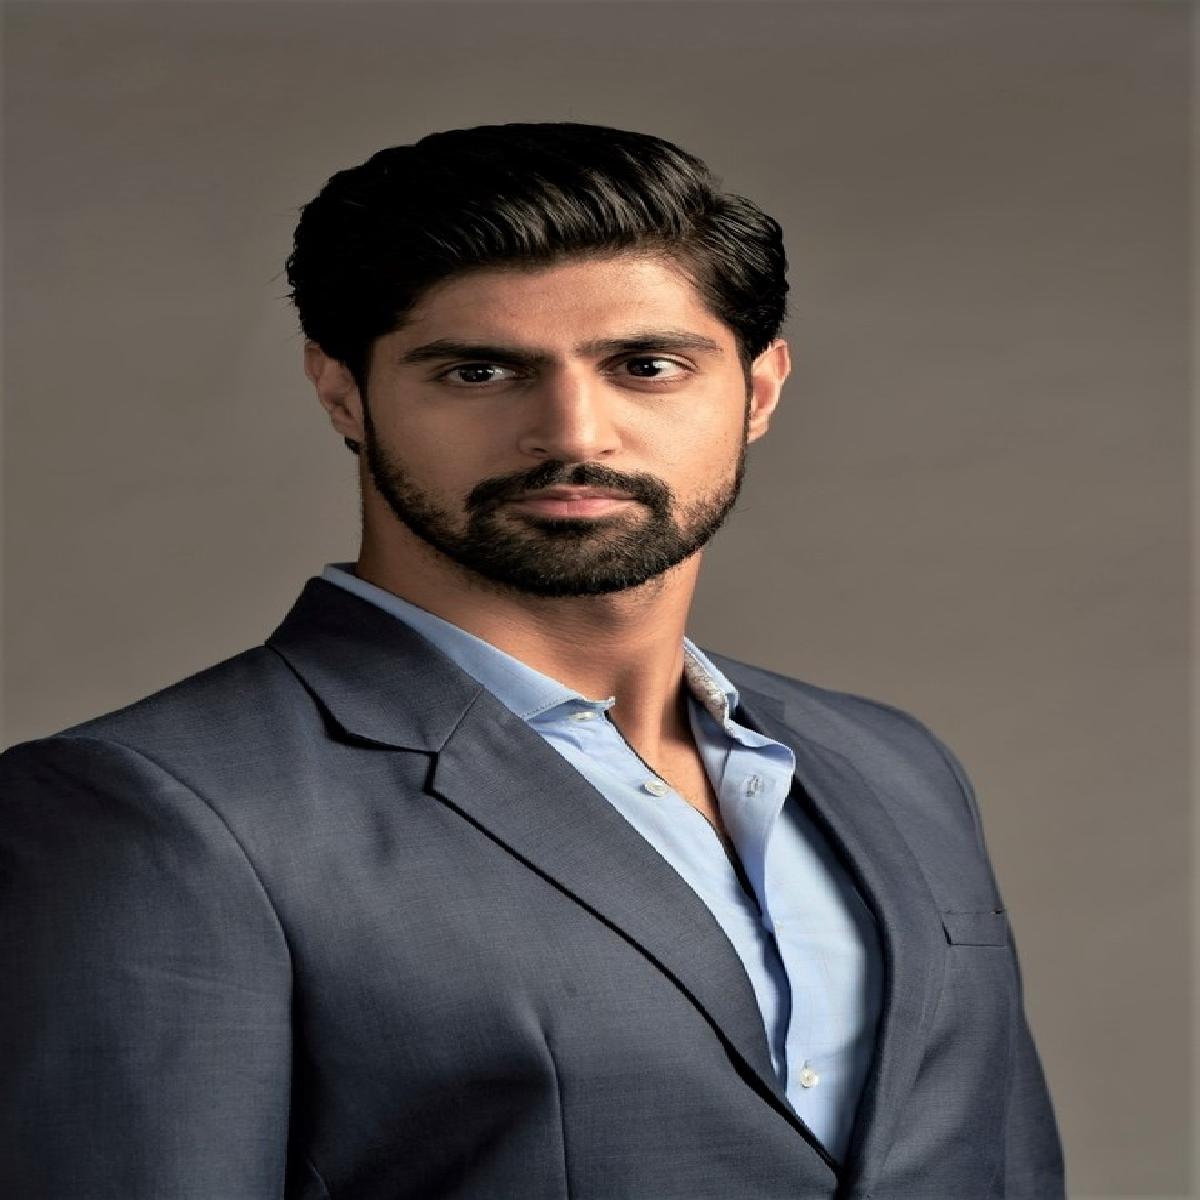 Short Films Are The Purest Form Of Art Says Tanuj Virwani